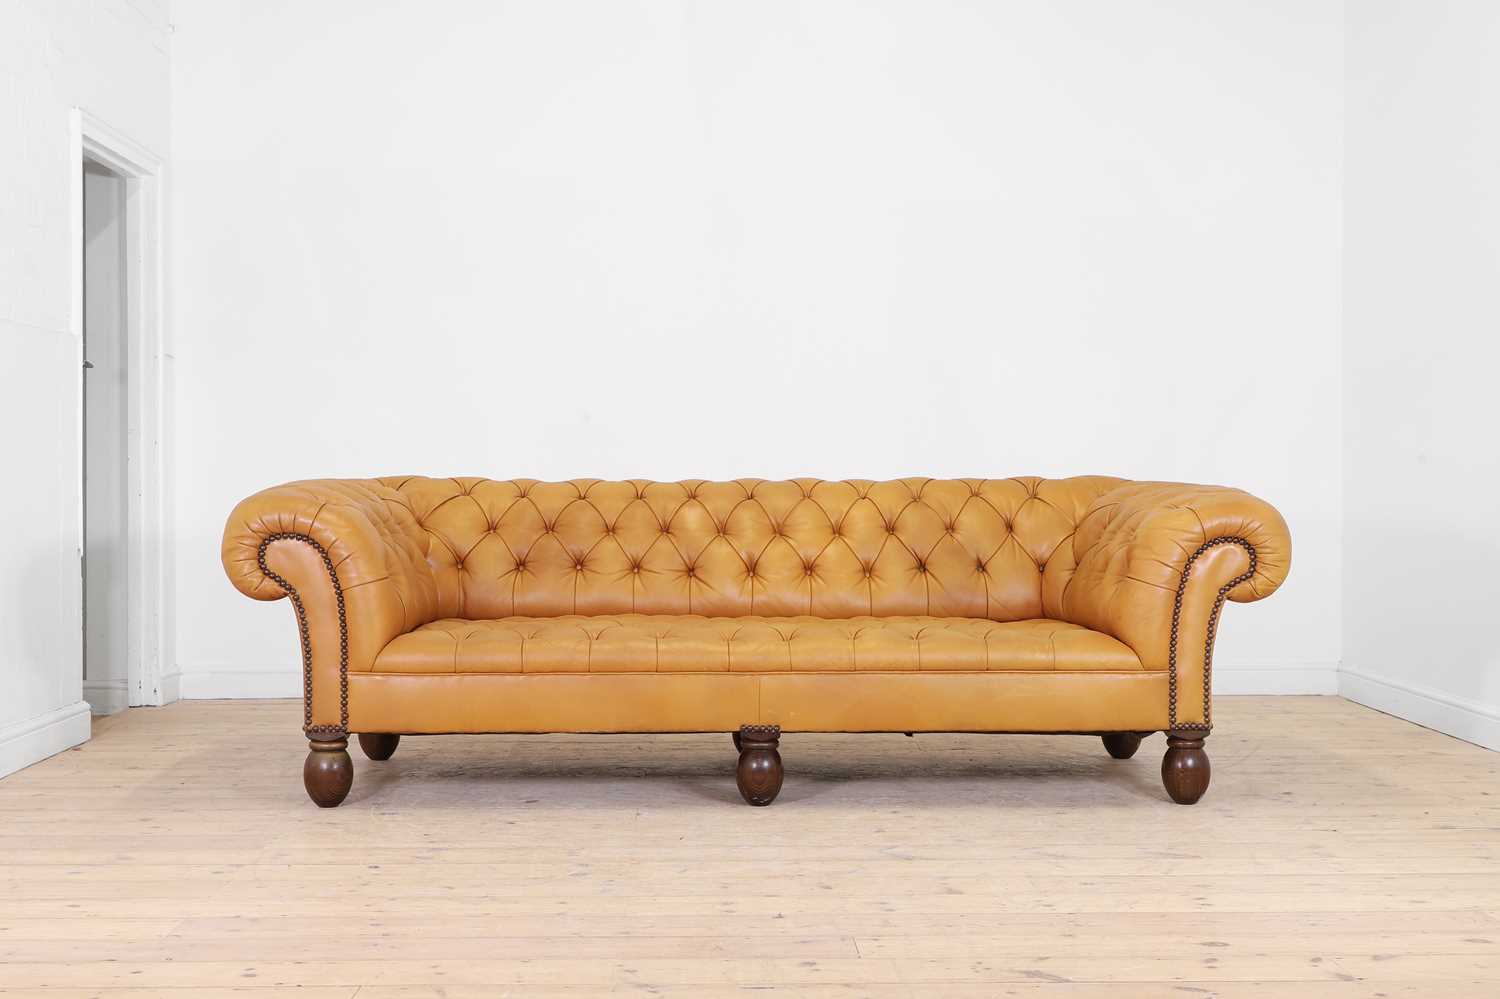 A chesterfield sofa by George Smith, - Image 2 of 8